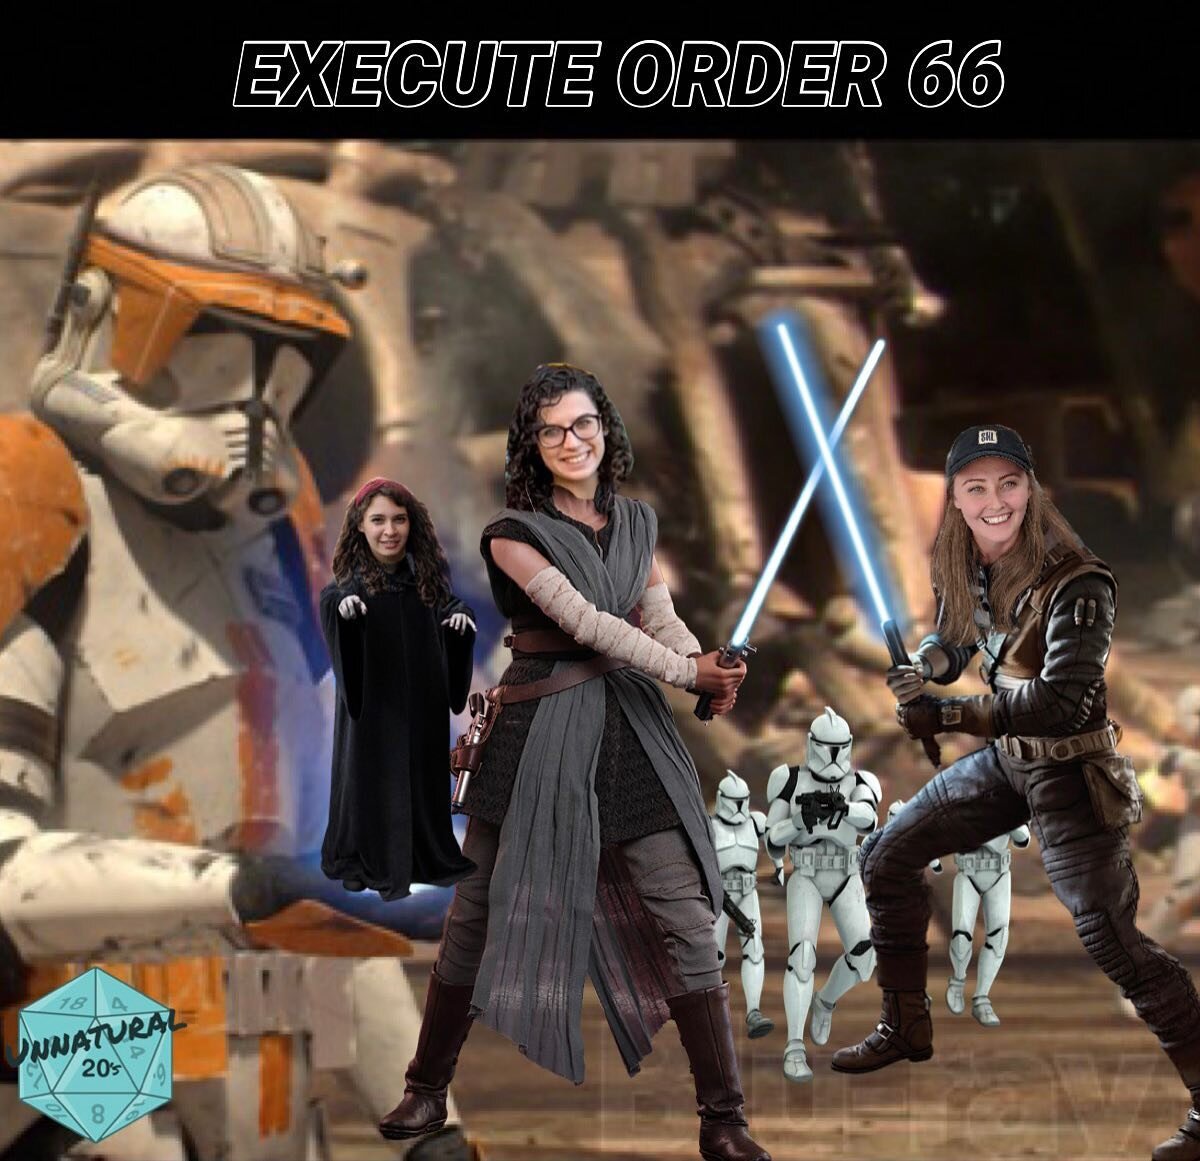 Ep 166 Execute Order 66
All of our dreams are coming true in this episode as we finally get to be Jedi Masters!...Unfortunately, our joy may be short-lived as this life dream appears to be happening at the same time as the fateful Order 66. So grab y